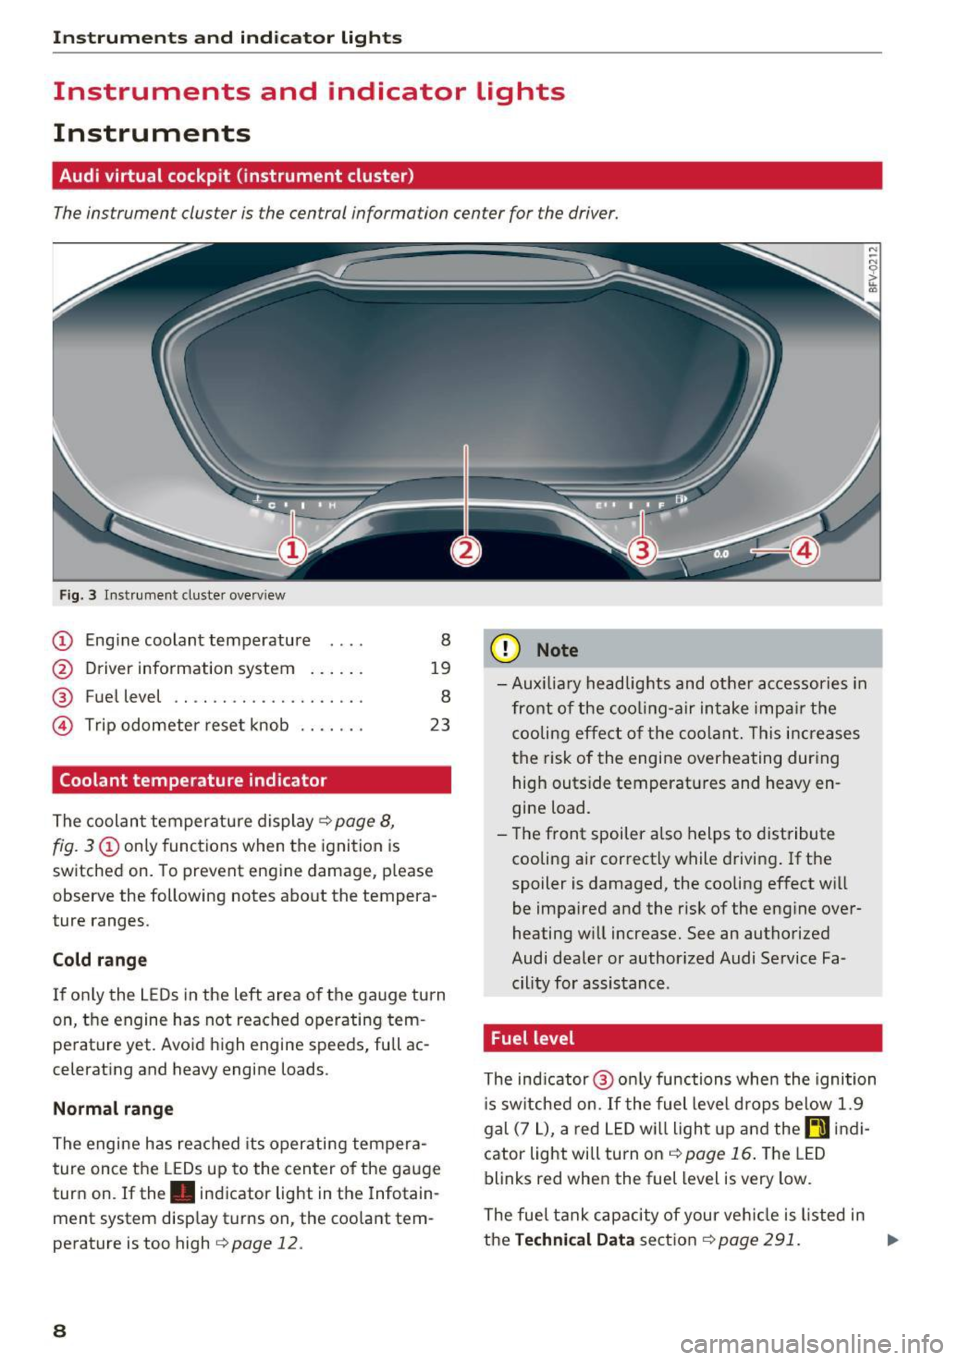 AUDI TT ROADSTER 2017  Owners Manual Instrumen ts and  ind icator  ligh ts 
Instruments  and  indicator  Lights 
Instruments 
Audi virtual  cockpit  (instrument  cluster) 
The instrument  cluster  is  the central  information  center  fo